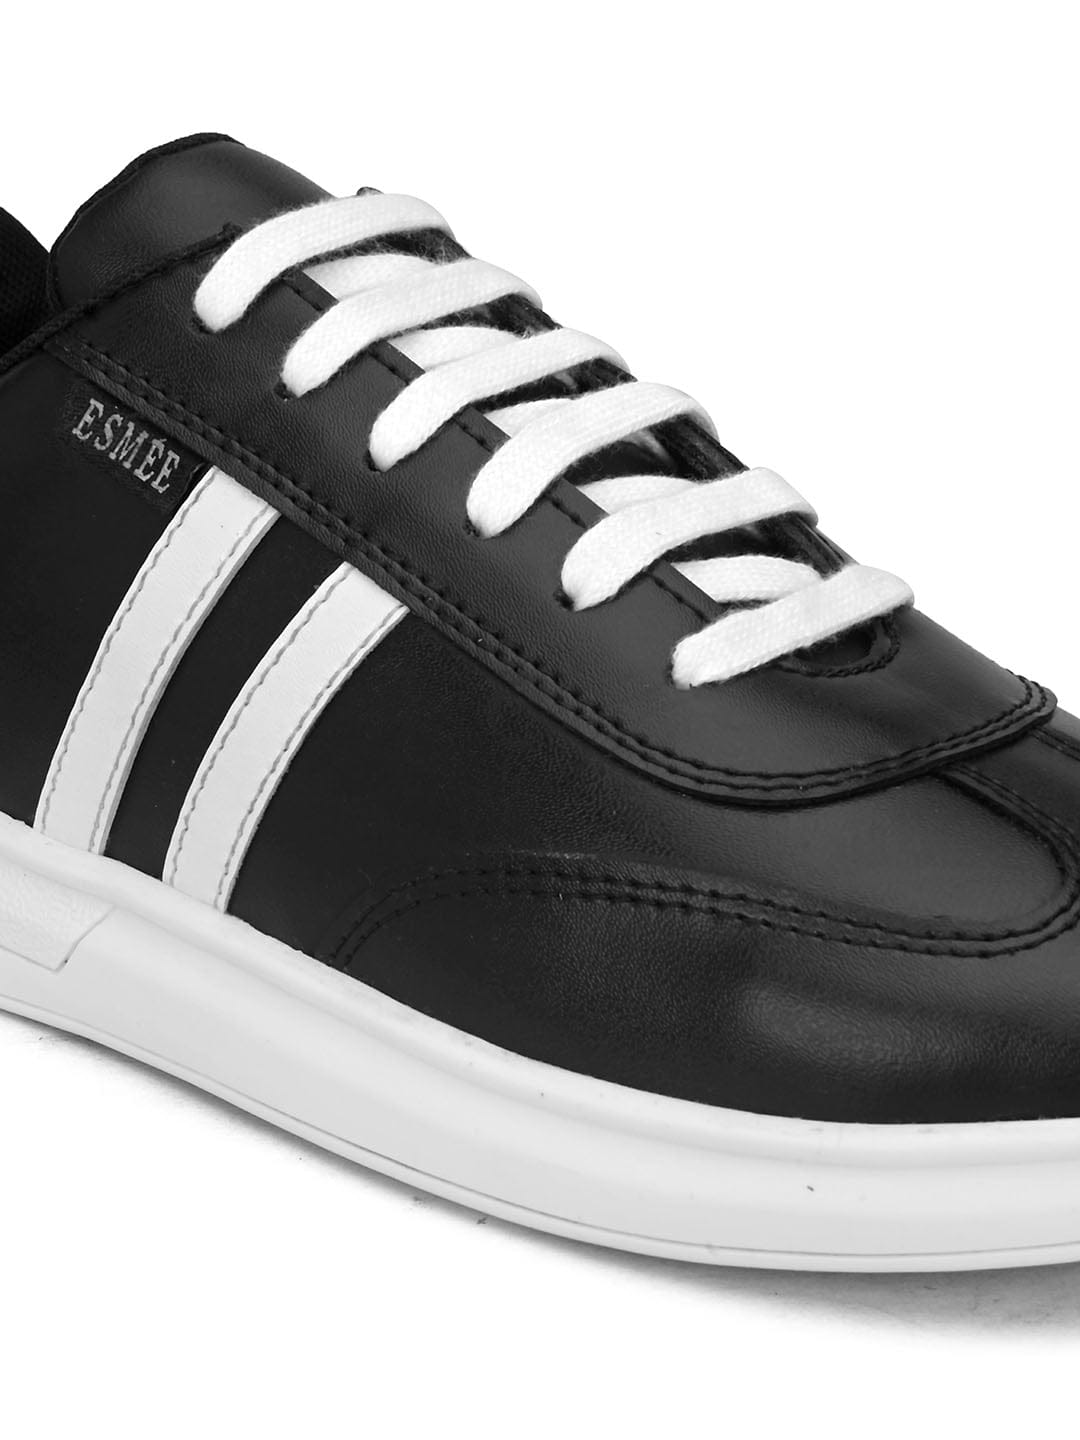 ESMEE Lace Up Casual Sporty Sneakers